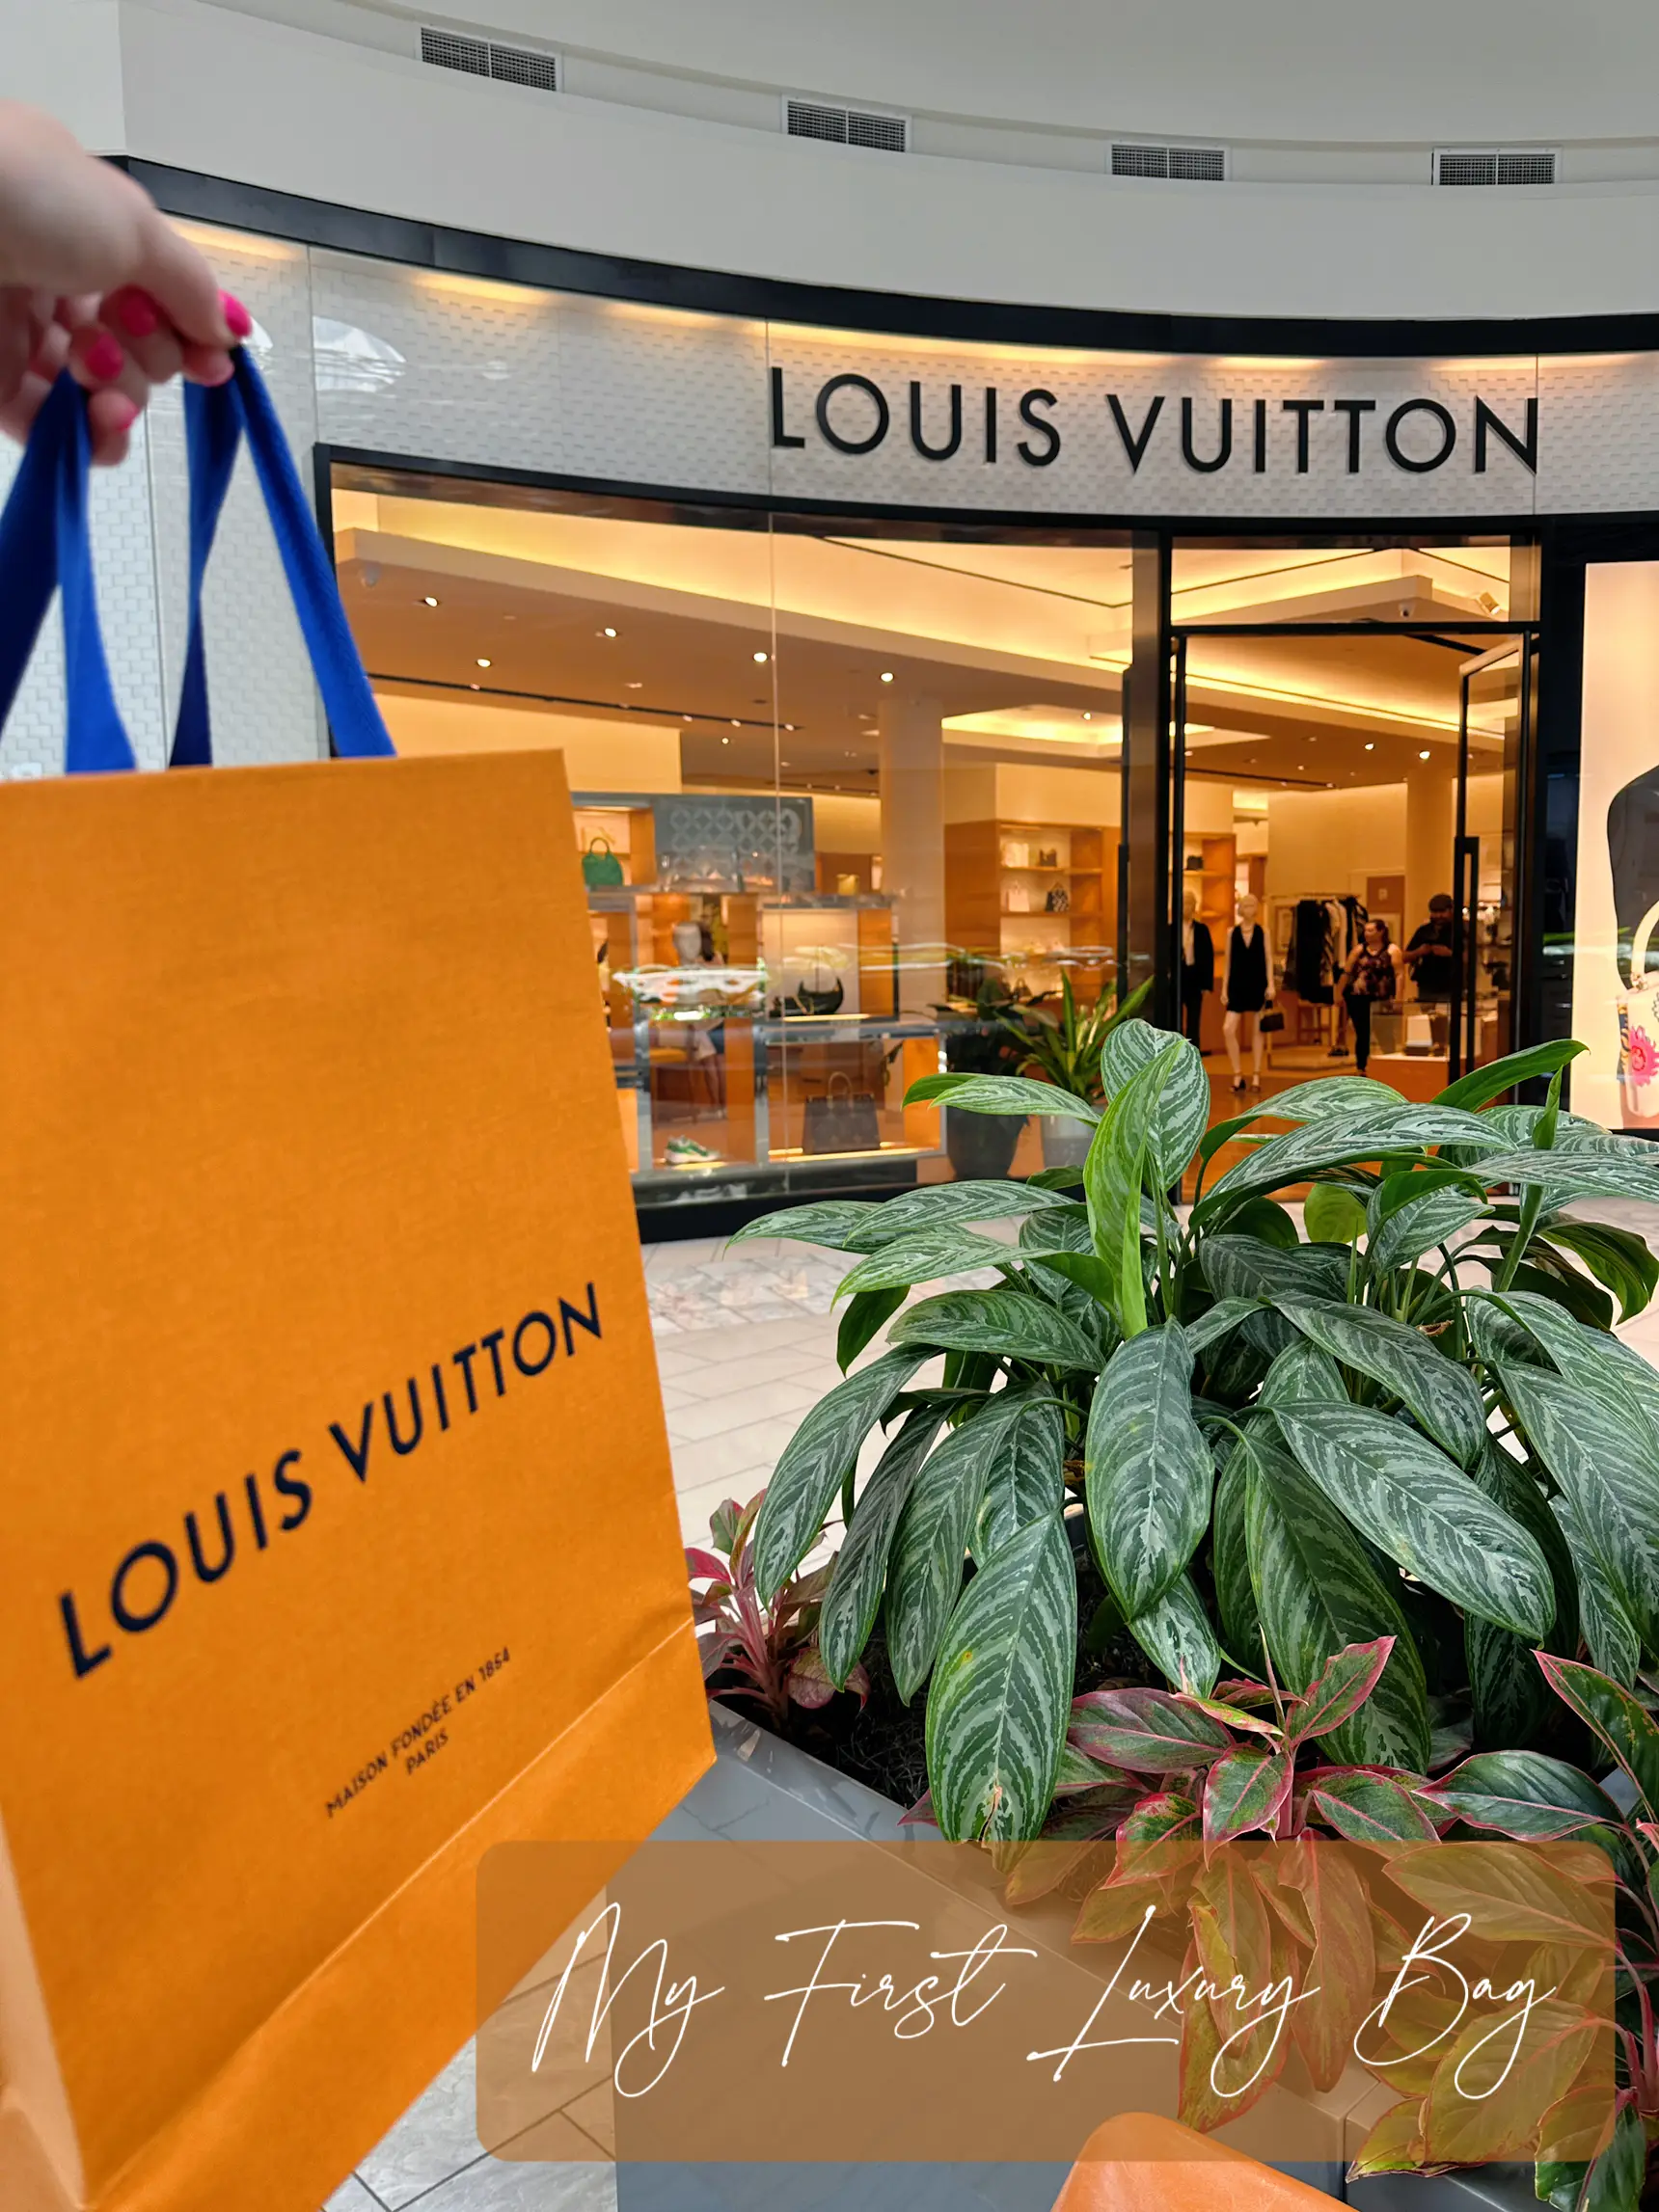 My First Louis Vuitton, Gallery posted by Jill Morrison